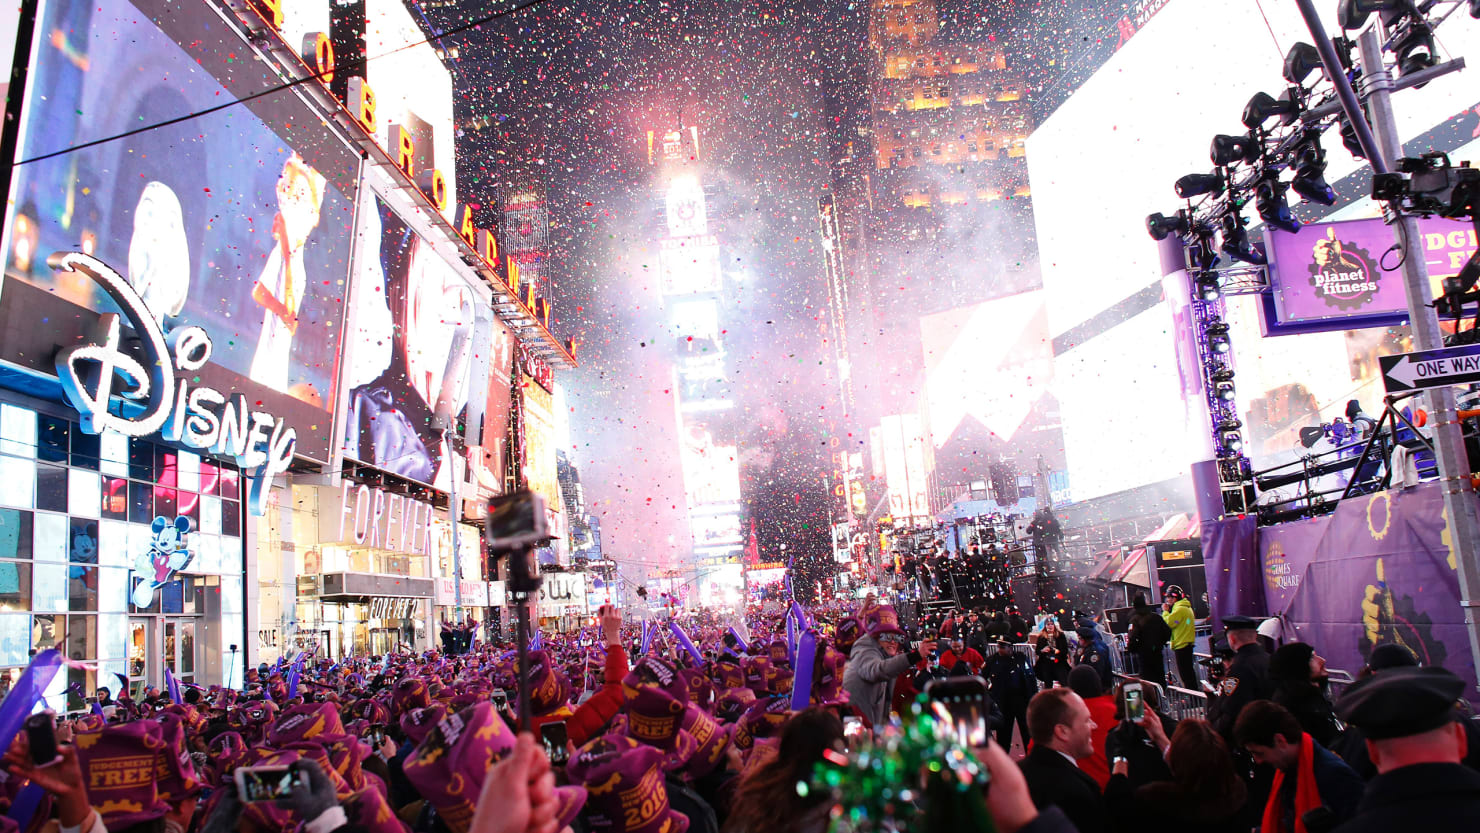 How to Watch the Times Square Ball Drop on New Year's Eve